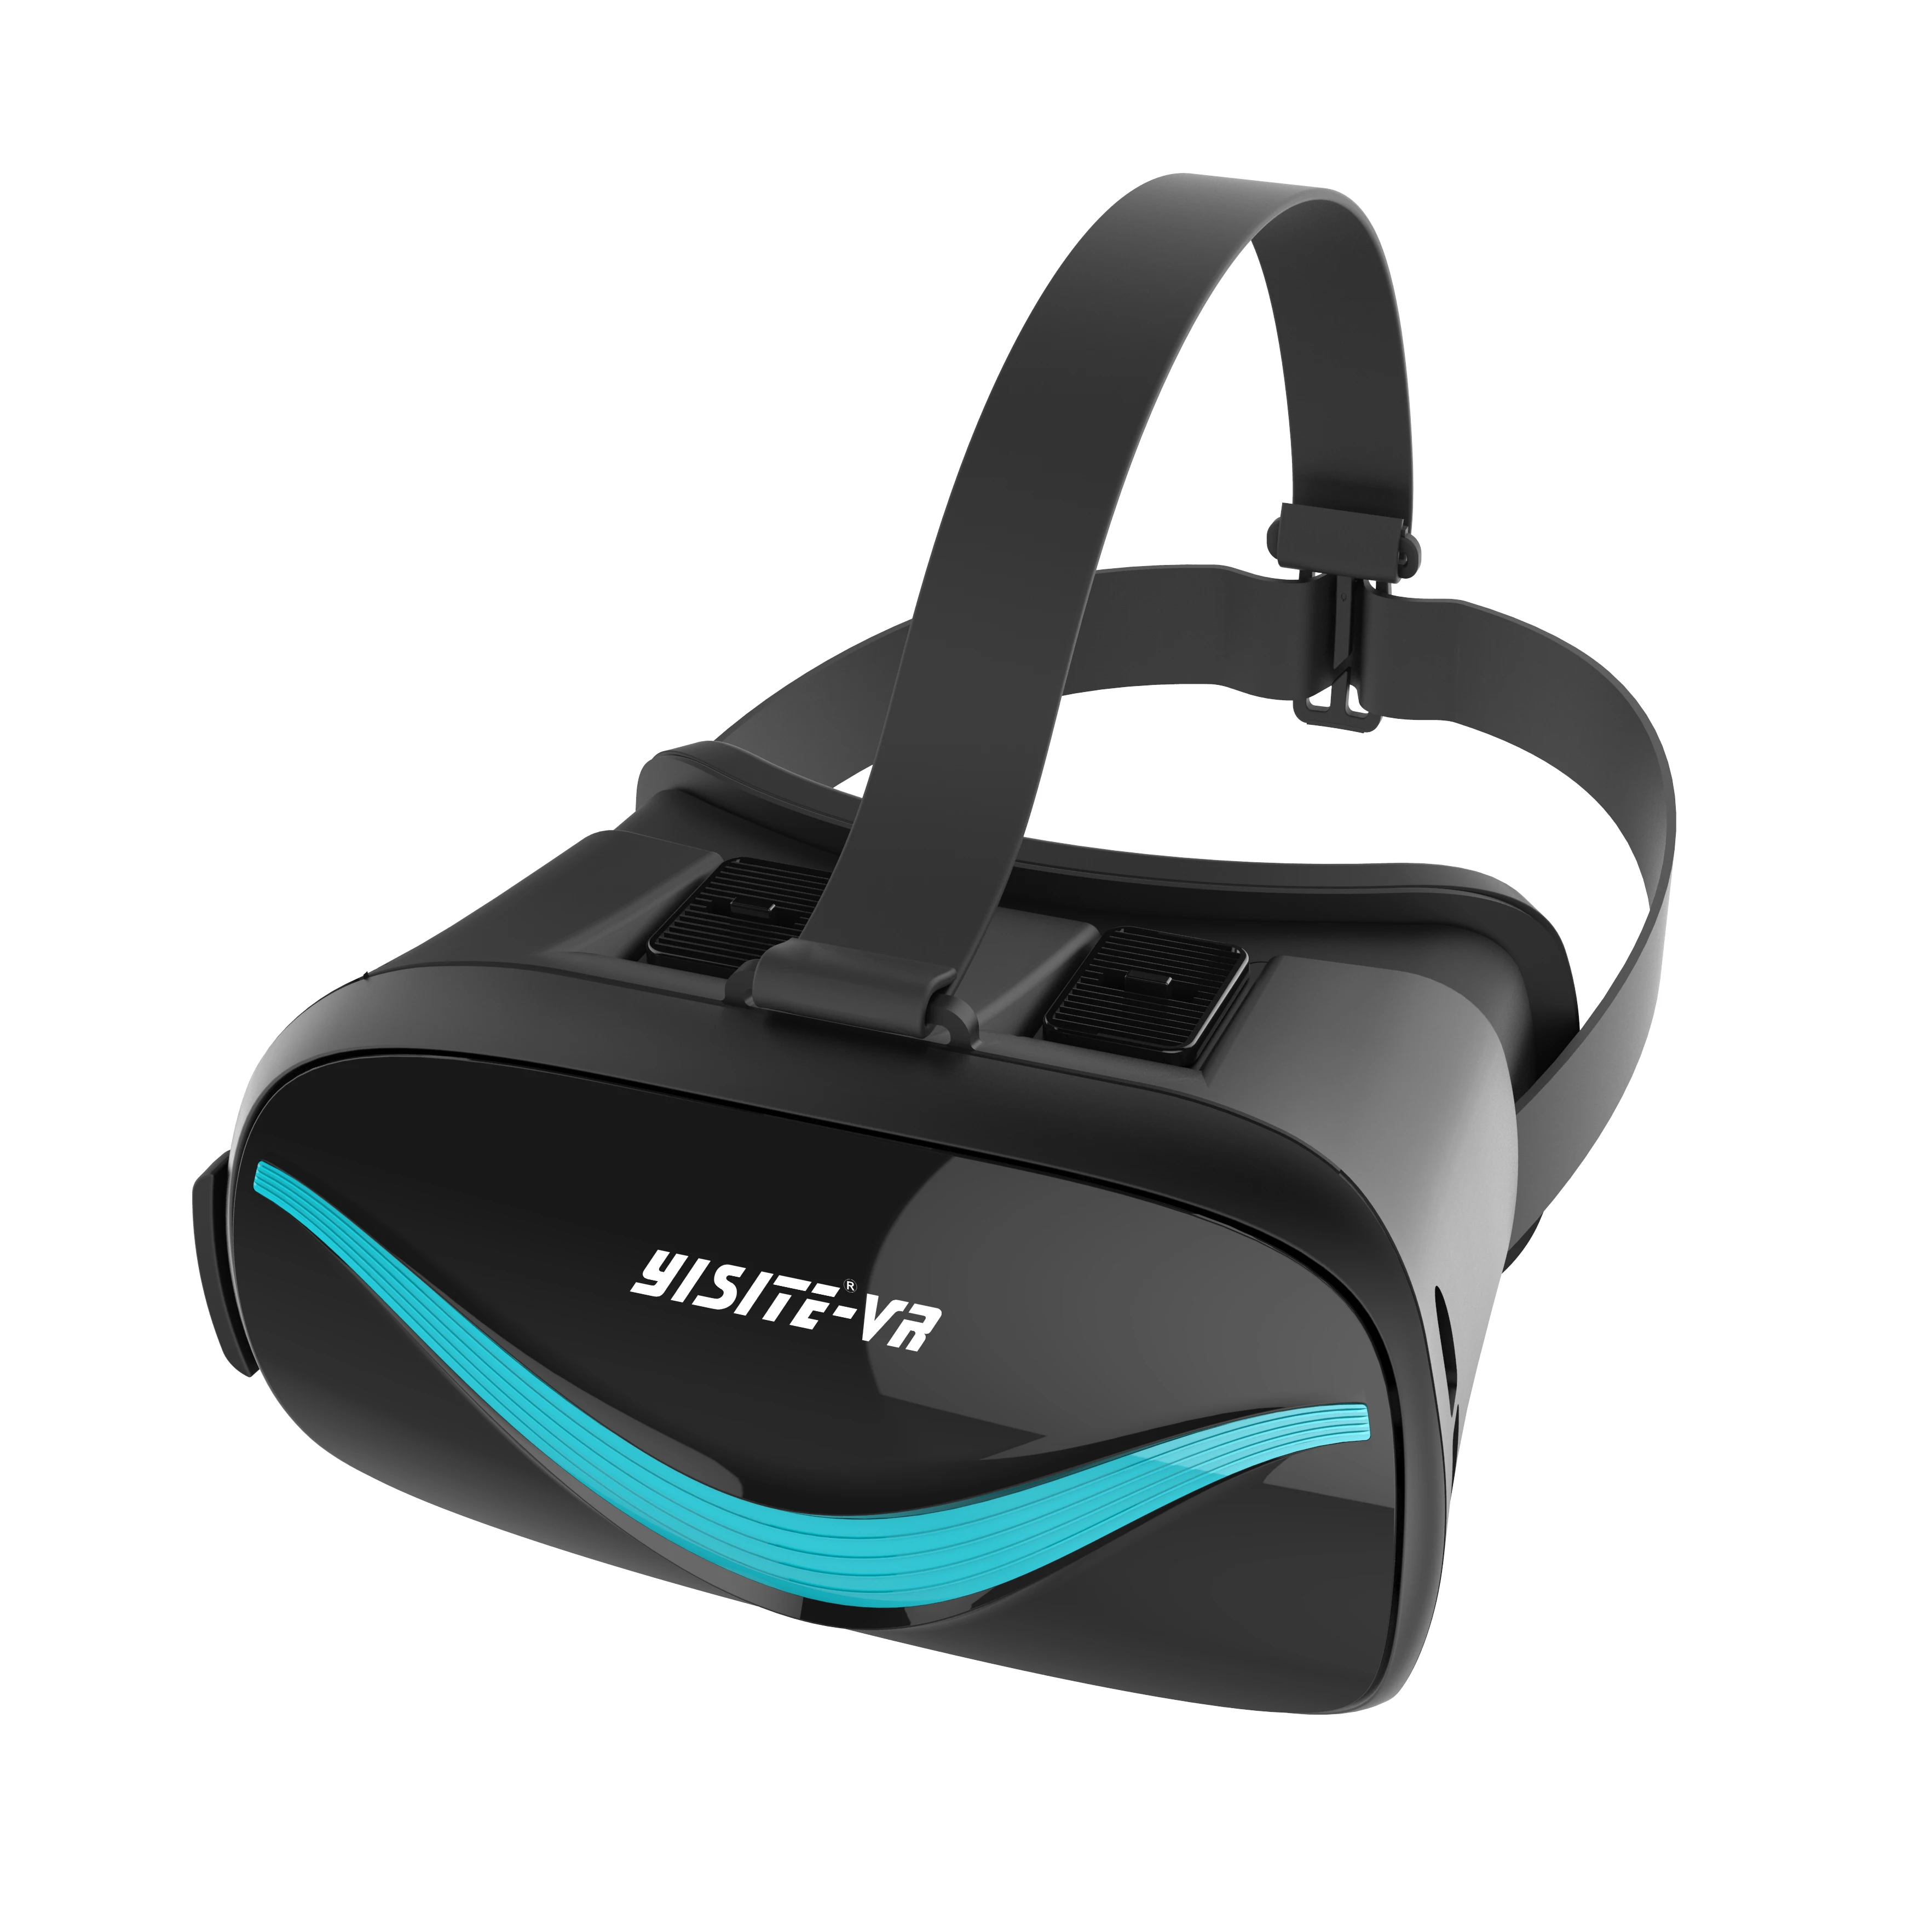 

Newest Version vr headset 3D Virtual Reality Glasses for 4.7'-5.7' Smartphone